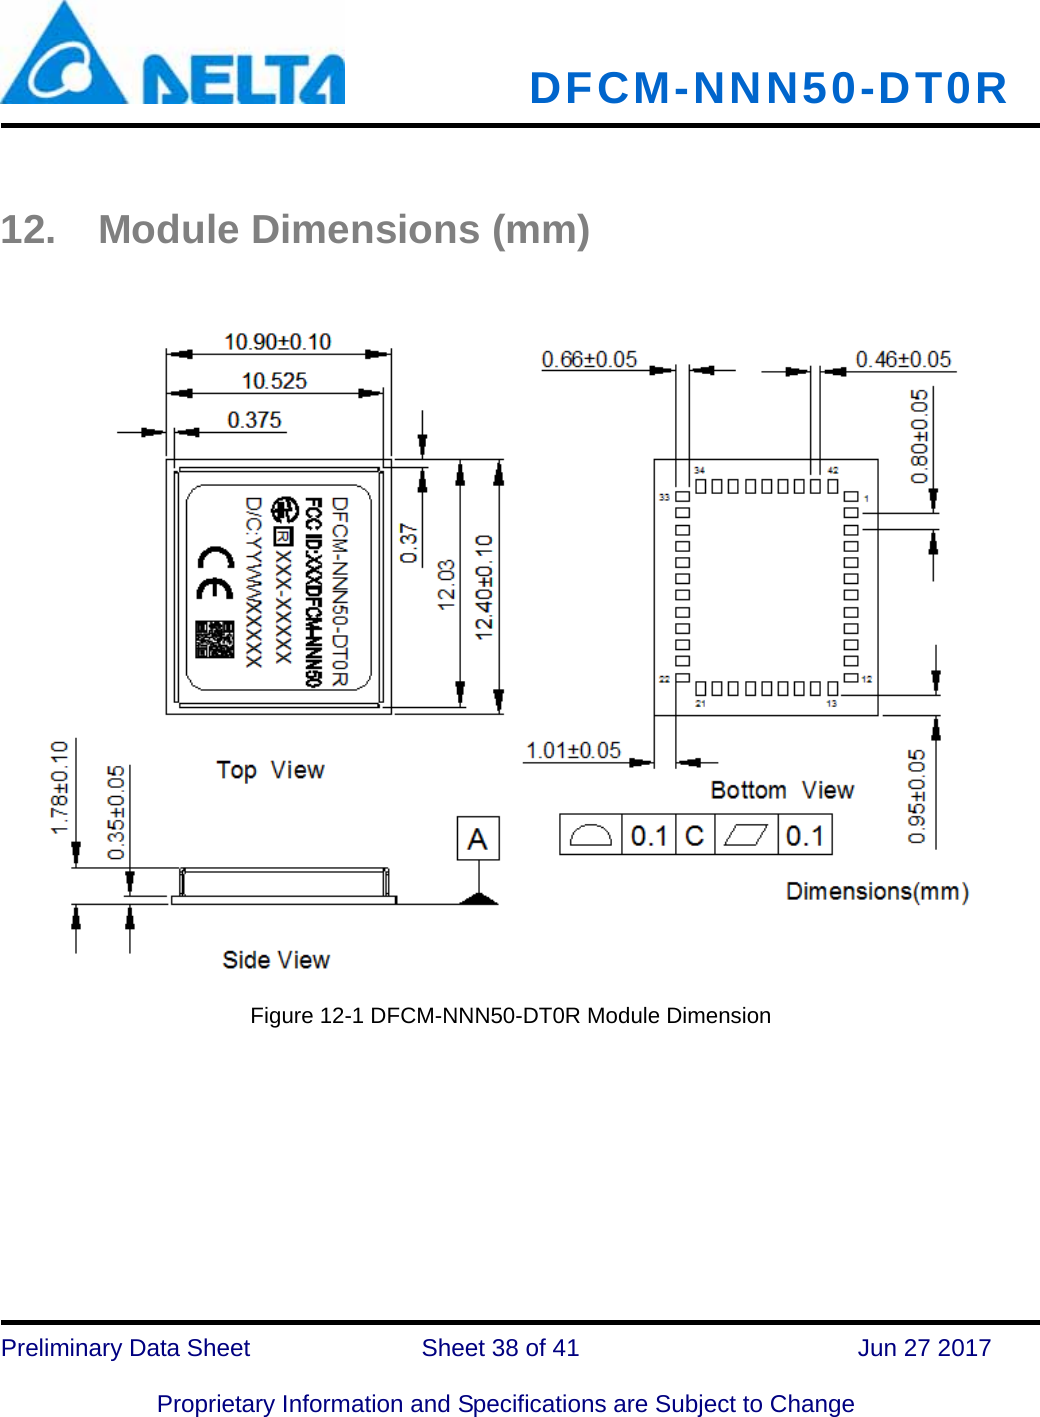   DFCM-NNN50-DT0R   Preliminary Data Sheet              Sheet 38 of 41      Jun 27 2017  Proprietary Information and Specifications are Subject to Change   12. Module Dimensions (mm)     Figure 12-1 DFCM-NNN50-DT0R Module Dimension  